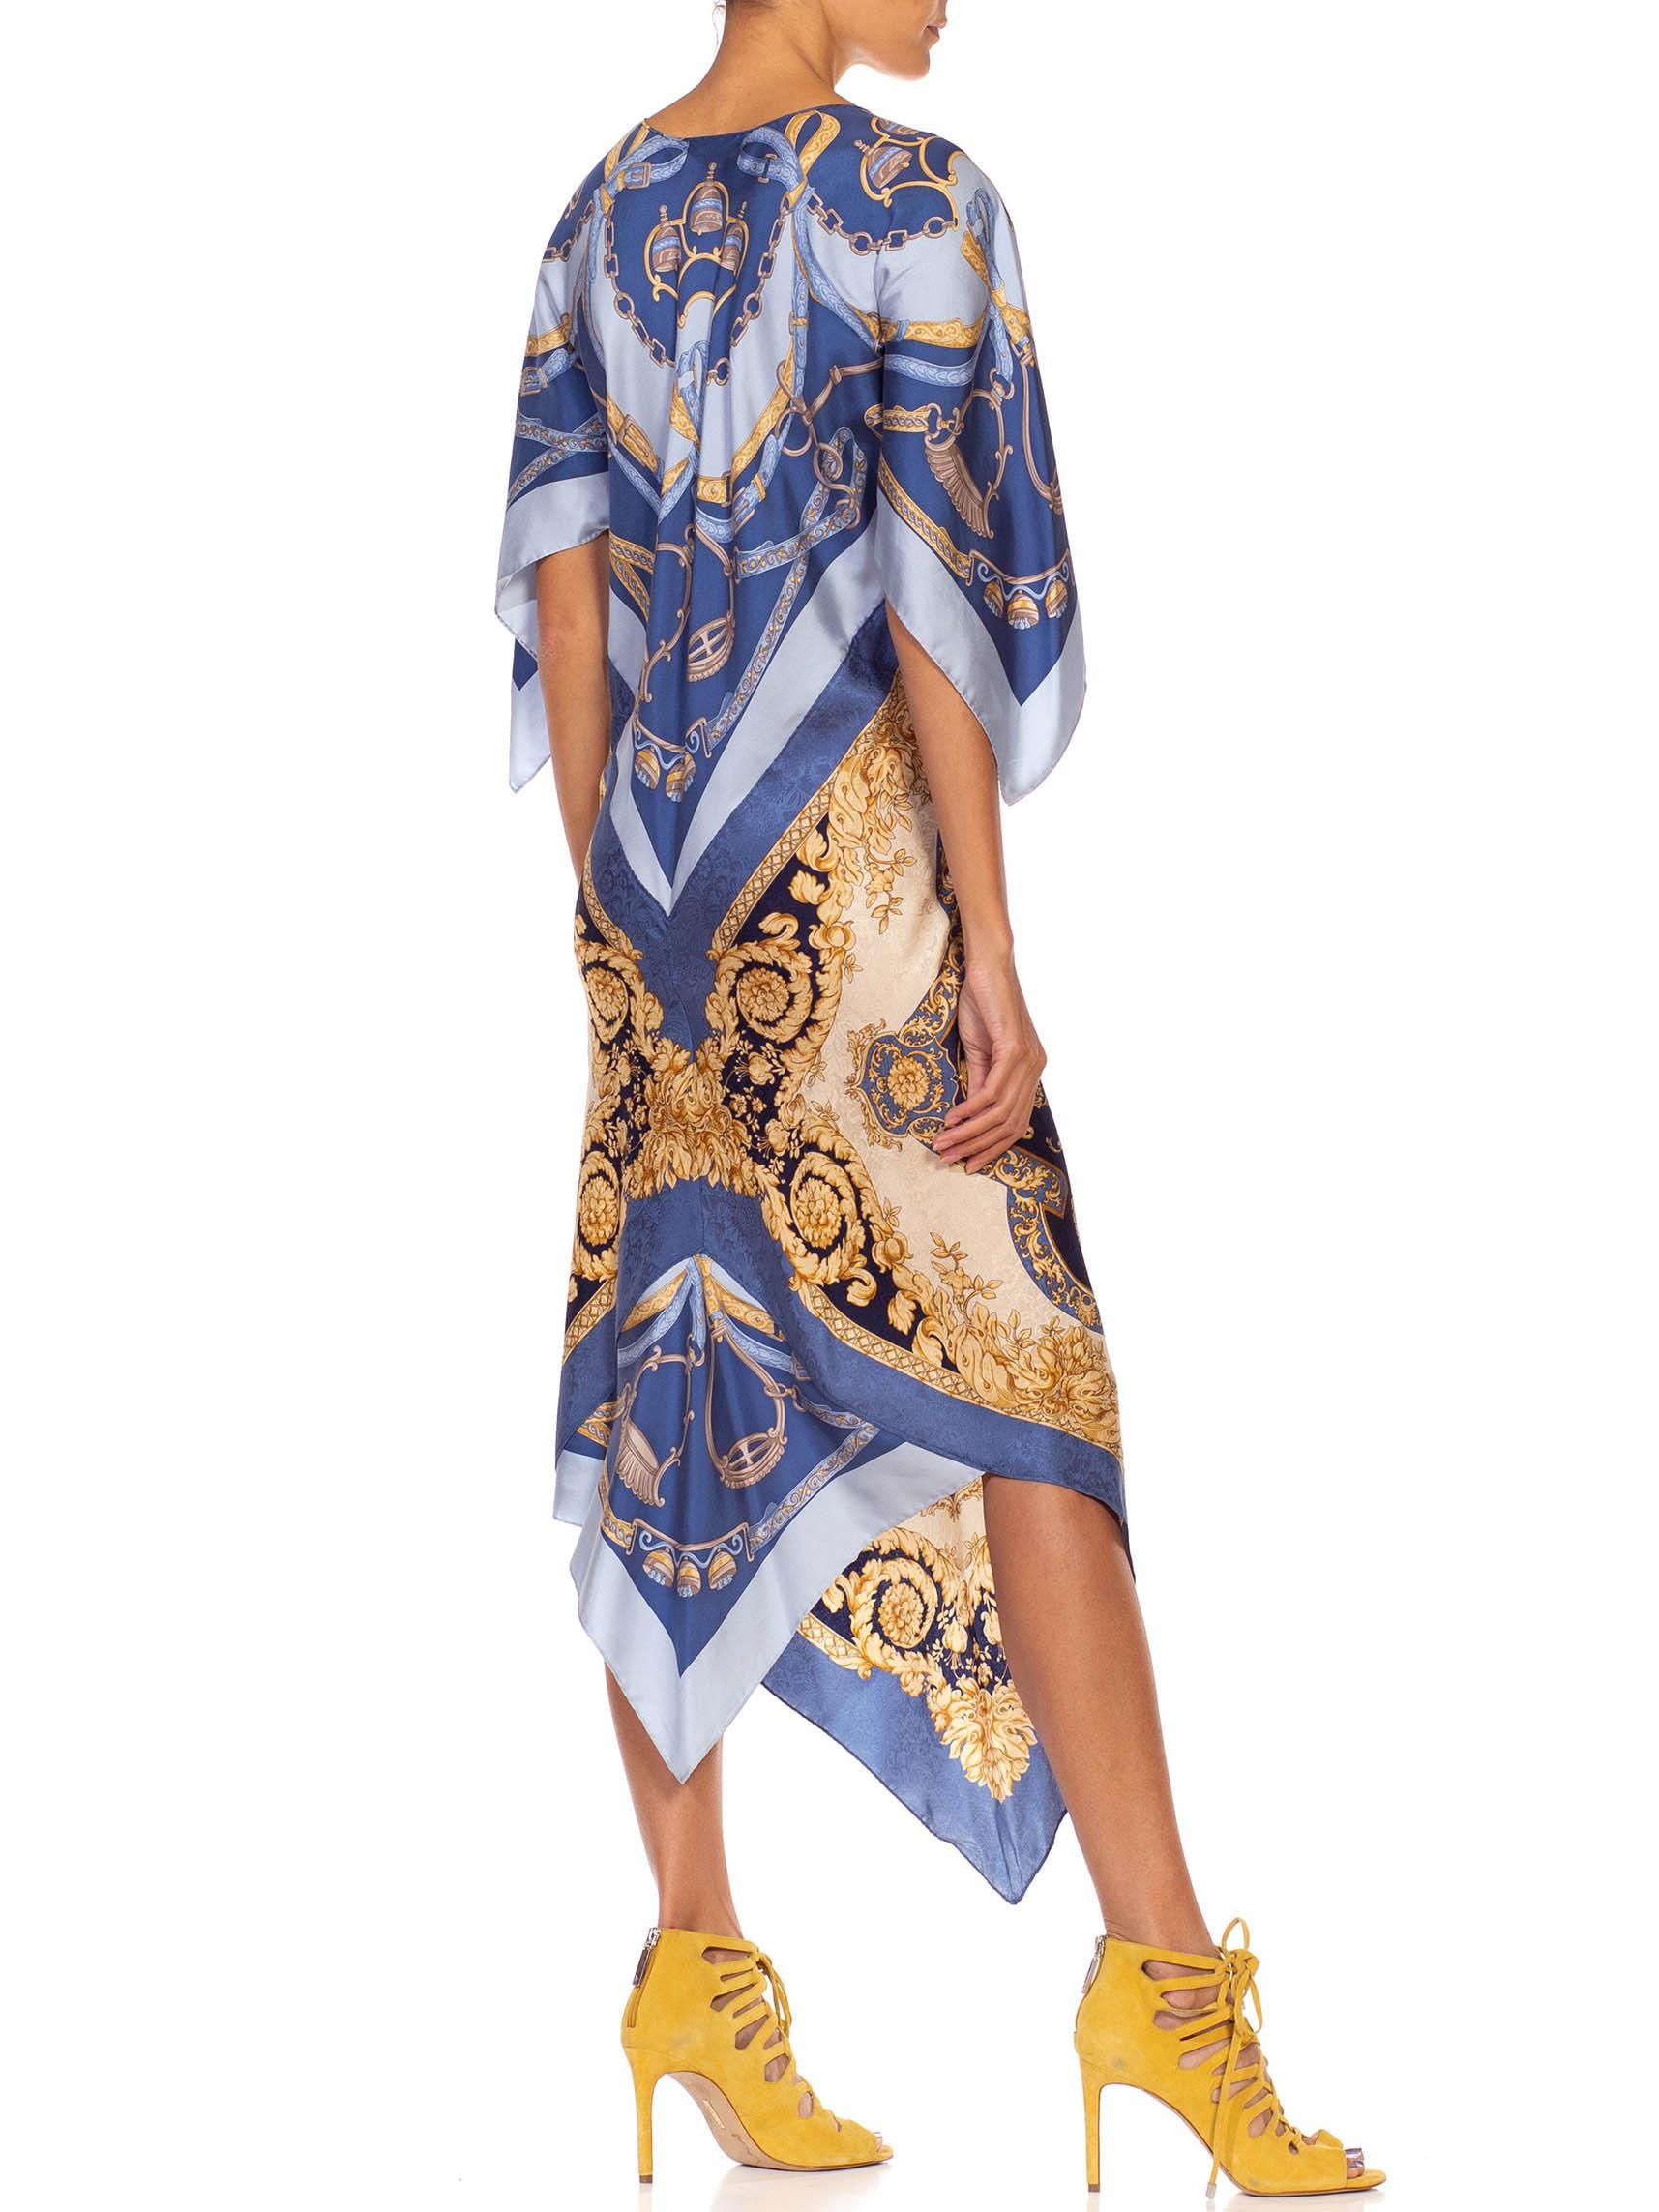 MORPHEW COLLECTION Light Blue Gold Silk Versace Style Print 2-Scarf Dress Made  1